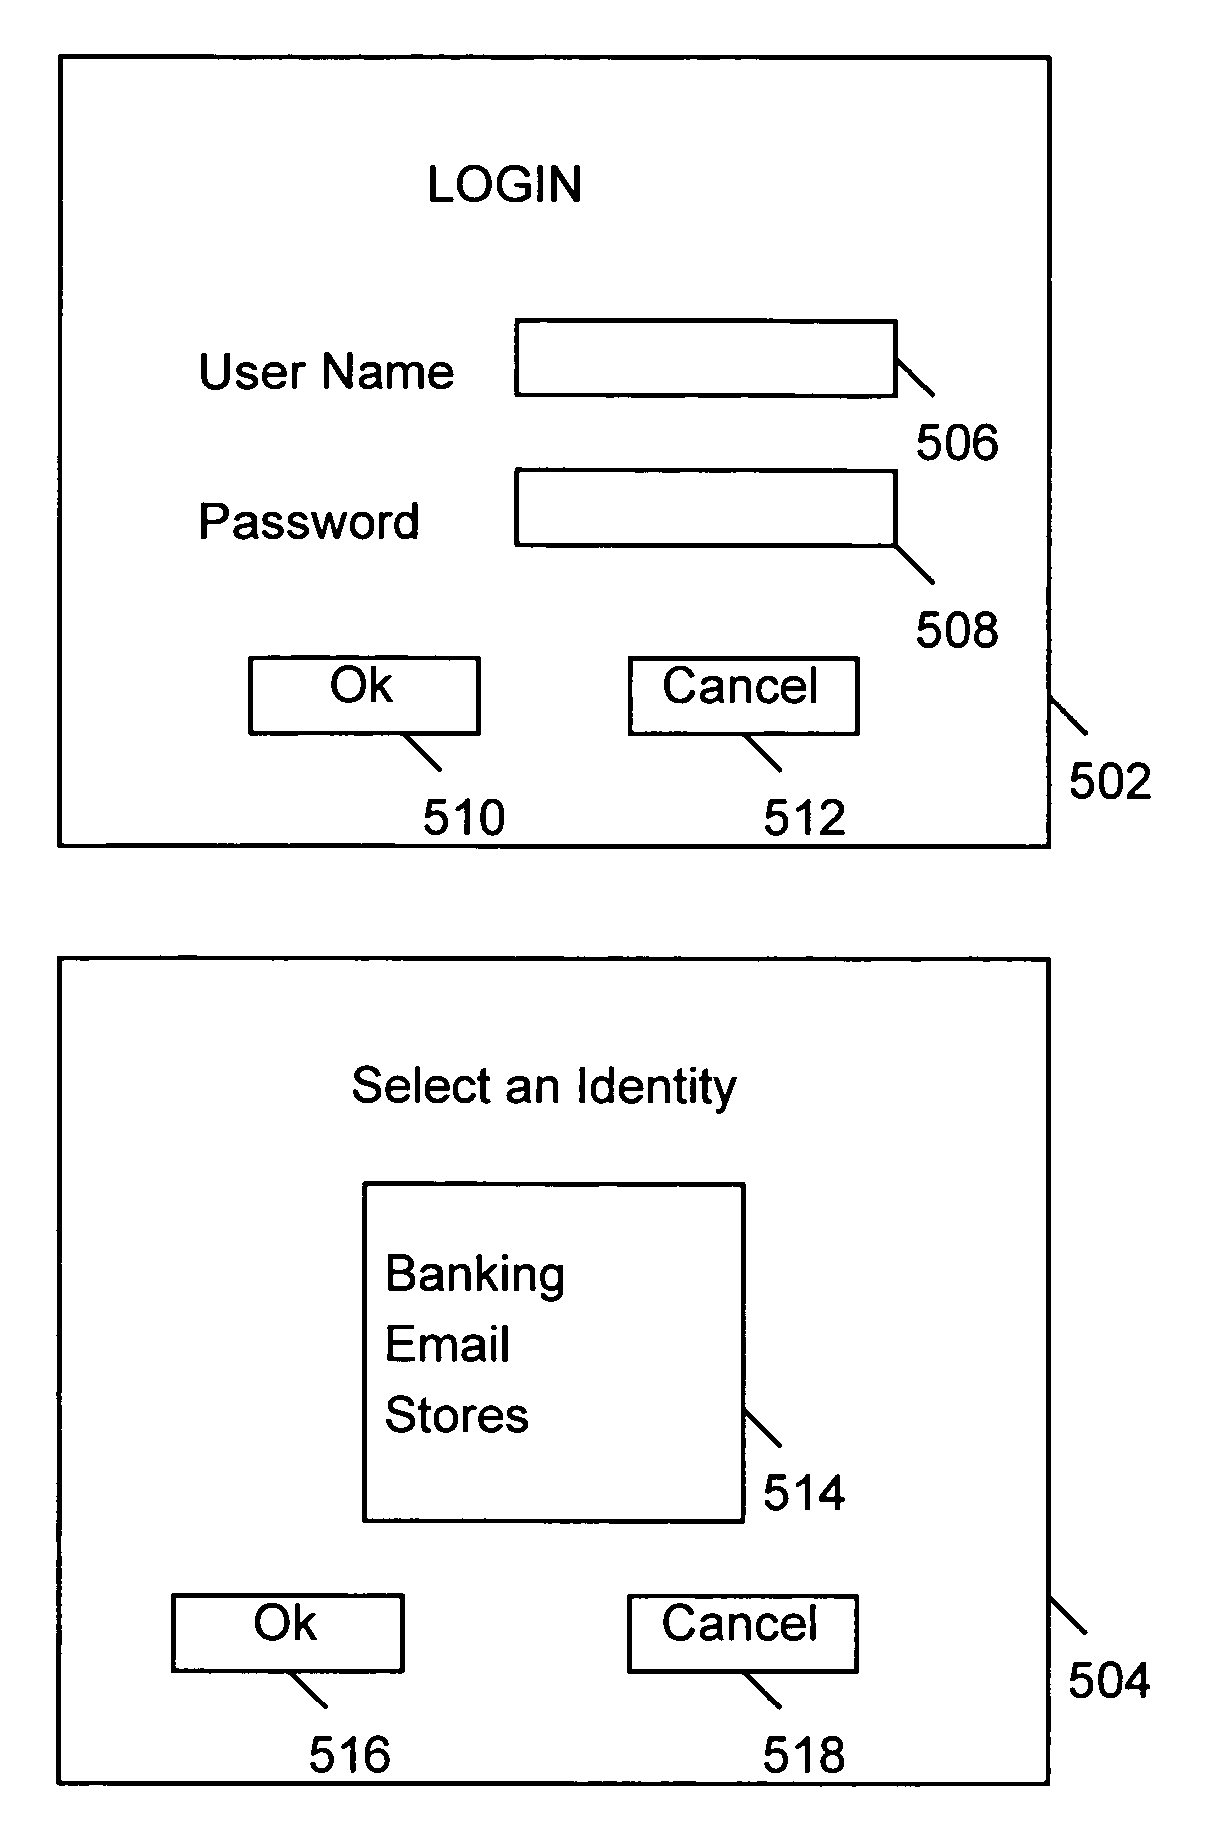 Secure management of authentication information